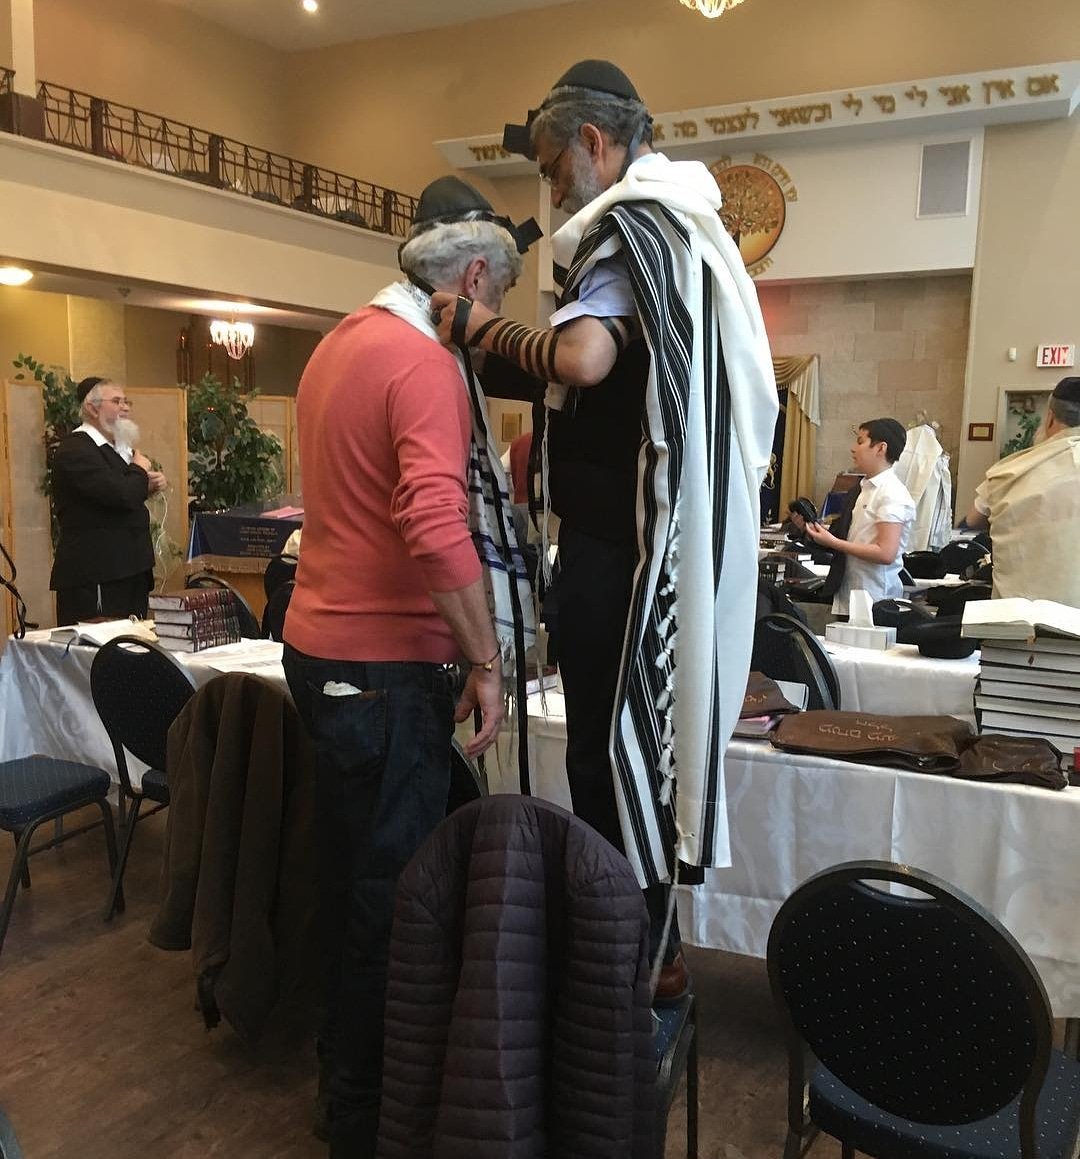 Bringing the mitzvah of Tefillin to the 21st century